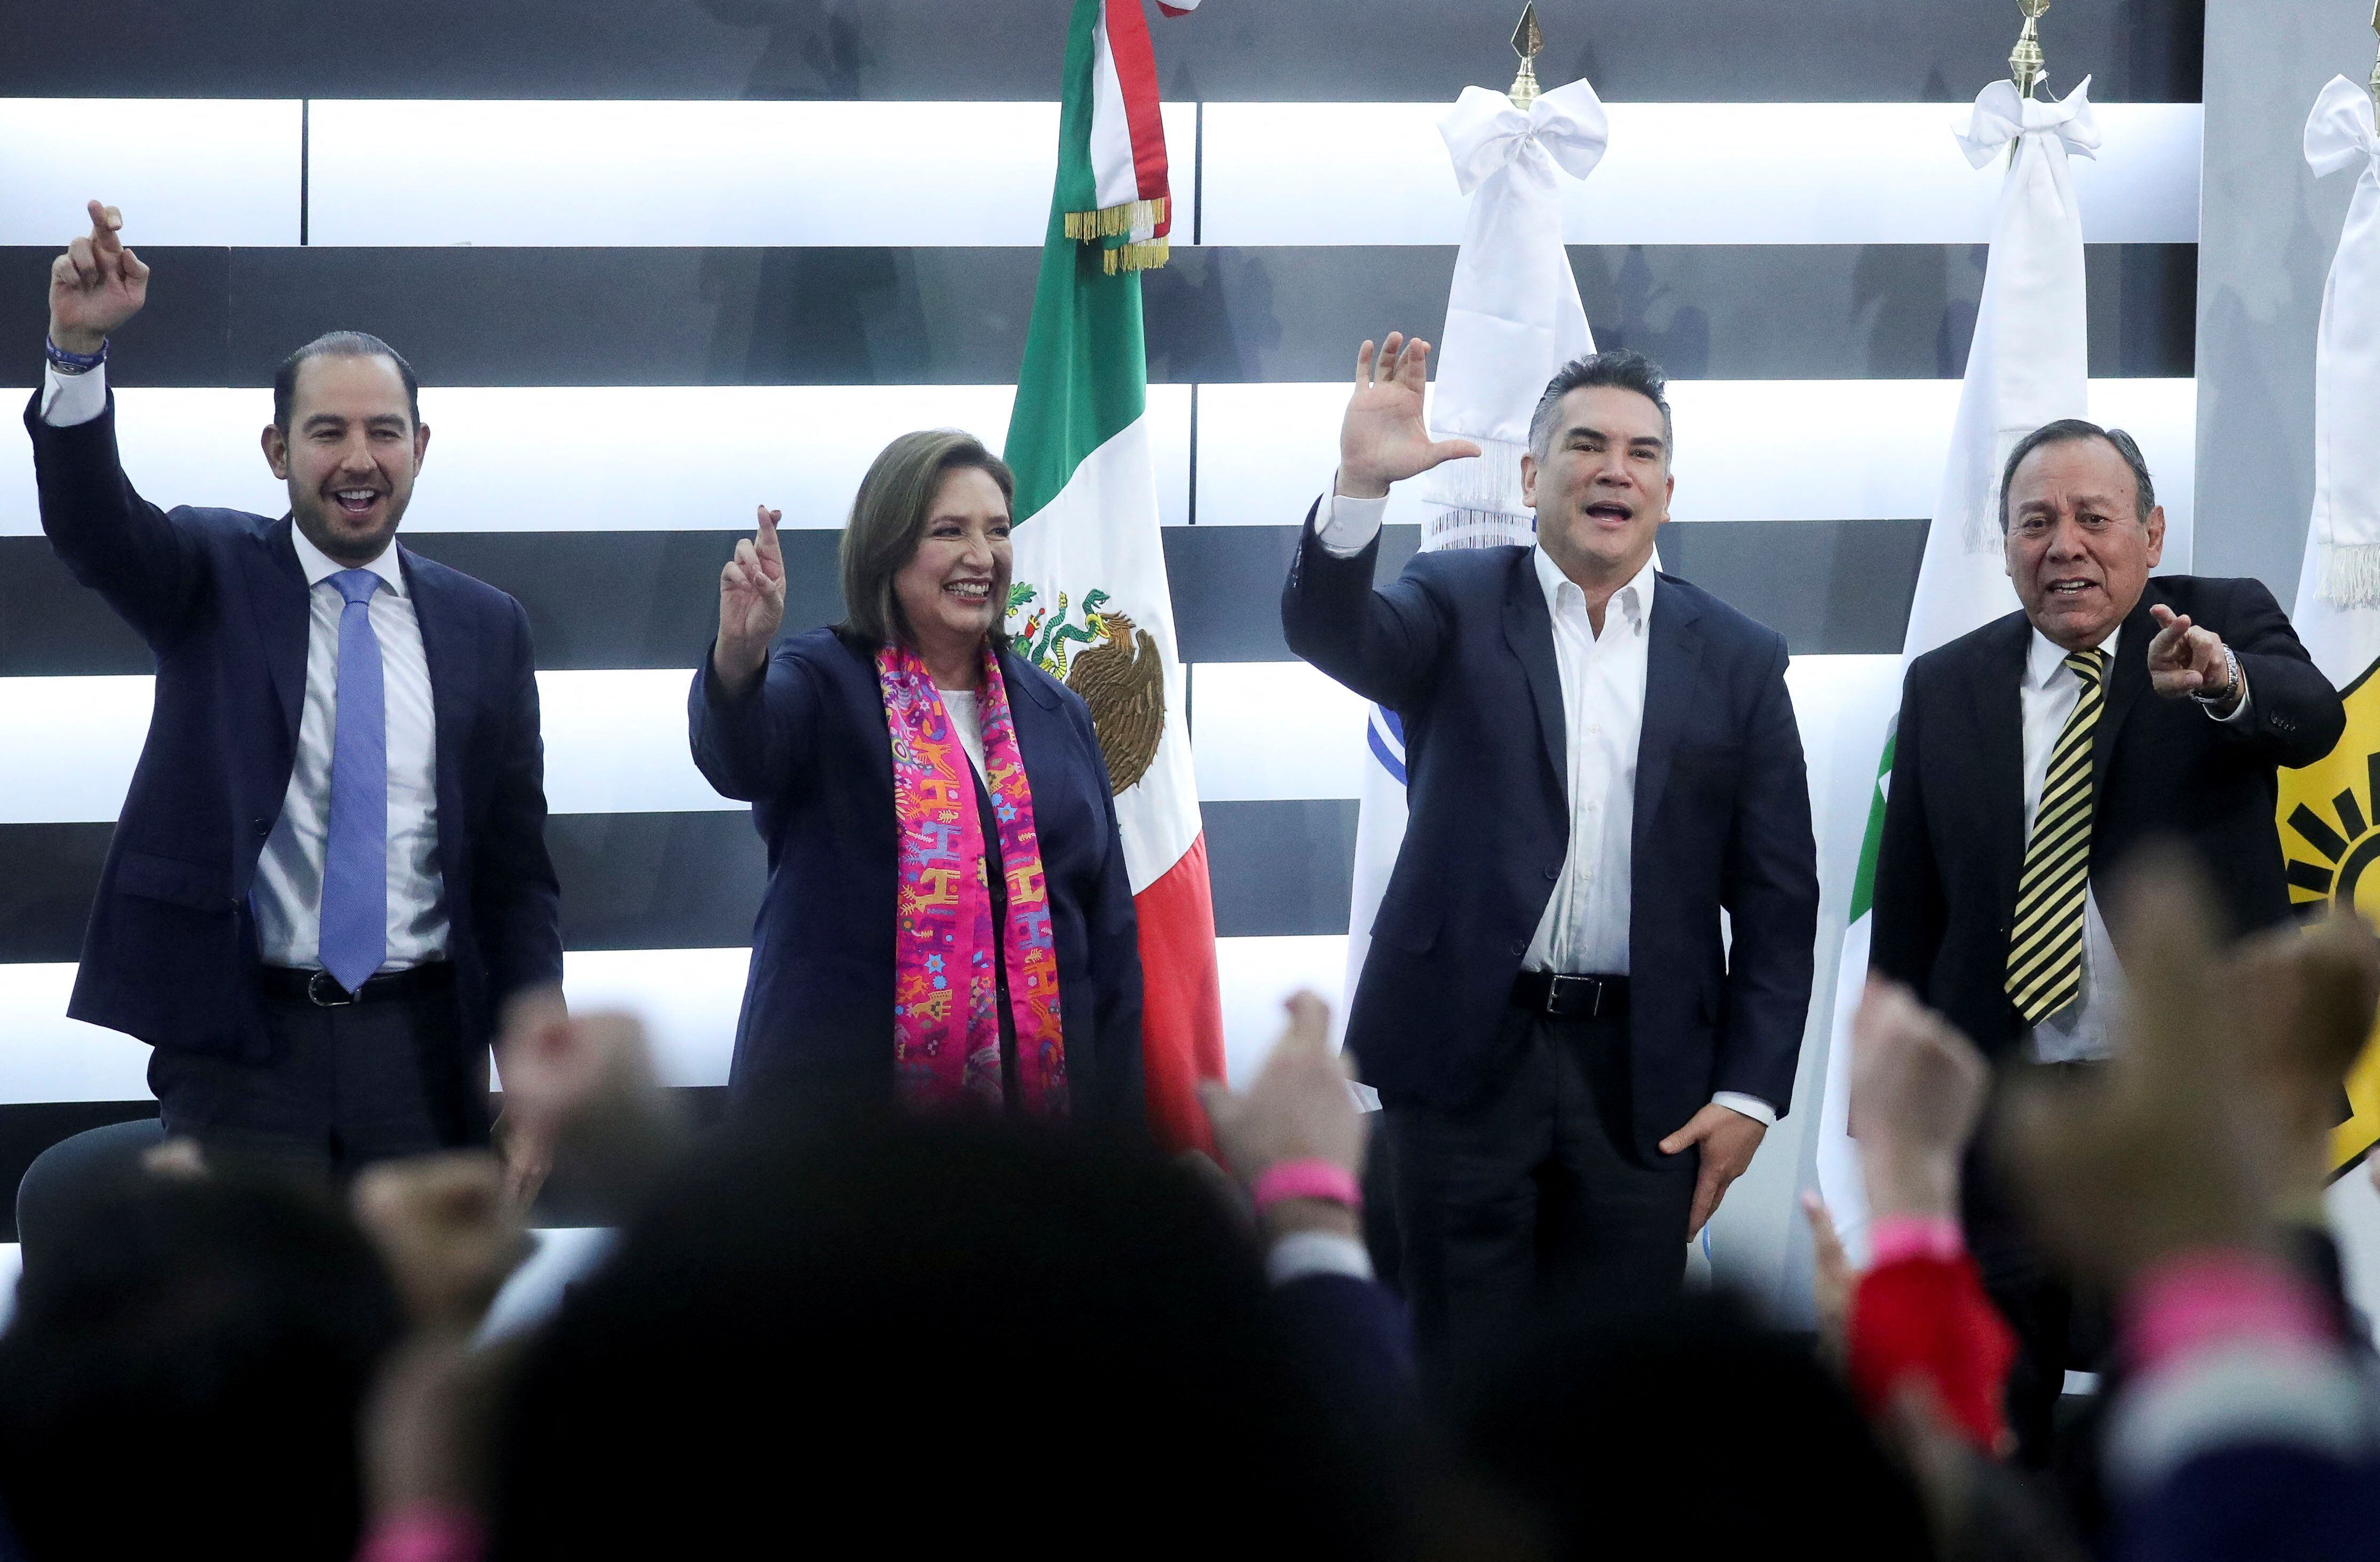 Opposition candidate Xochitl Galvez of a party coalition gestures next to President of the Institutional Revolutionary Party Alejandro Moreno, Marko Cortes, President of the National Action Party (PAN) and President of the Party of the Democratic Revolution (PRD) Jesus Zambrano, on the day of her registration as a presidential candidate for the upcoming June 2 general election at the National Electoral Institute (INE), in Mexico City, Mexico, February 20, 2024. REUTERS/Raquel Cunha